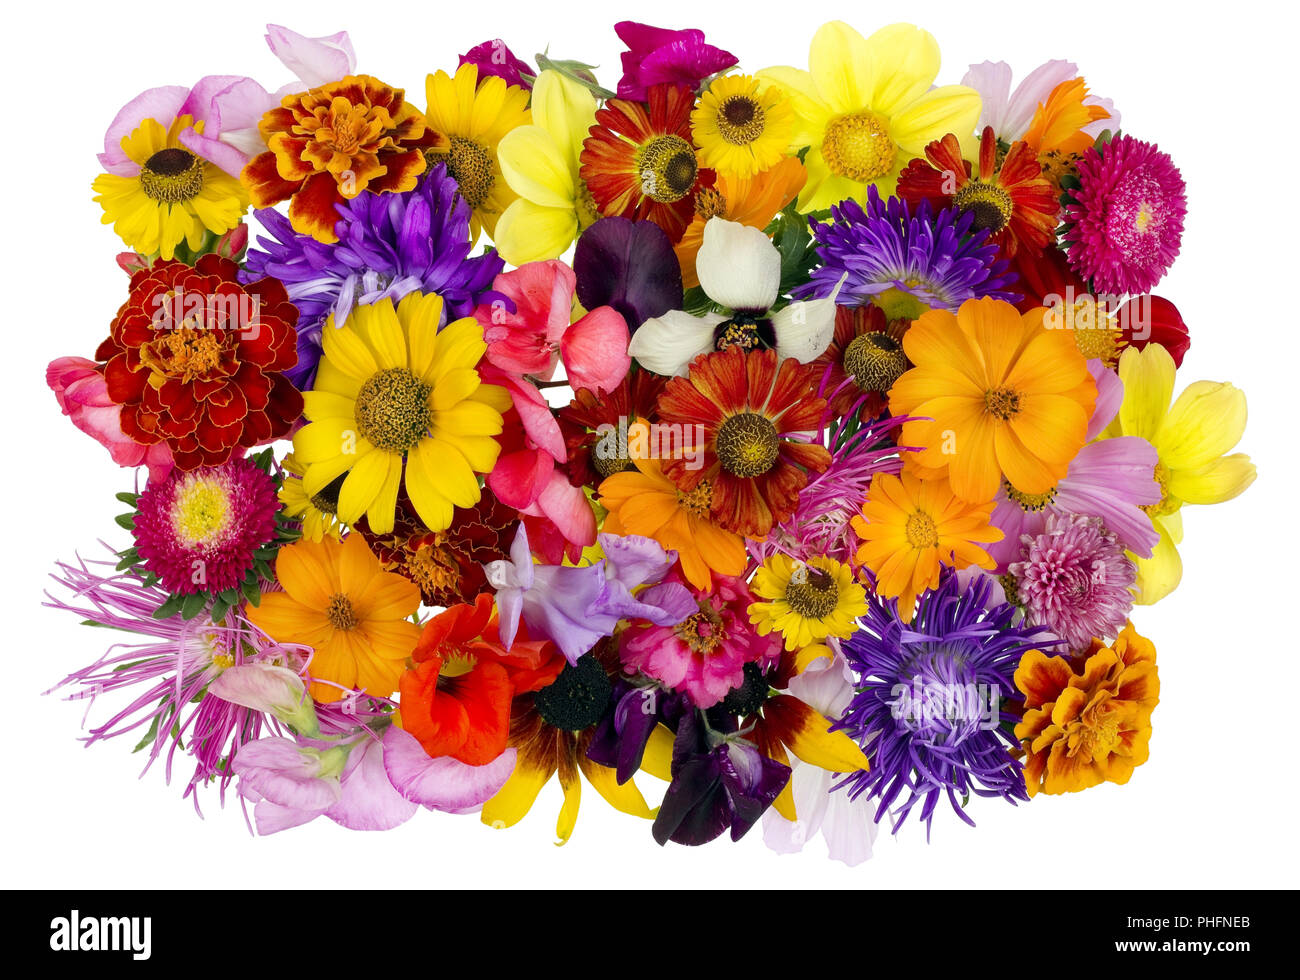 Floral chaos August collage Stock Photo